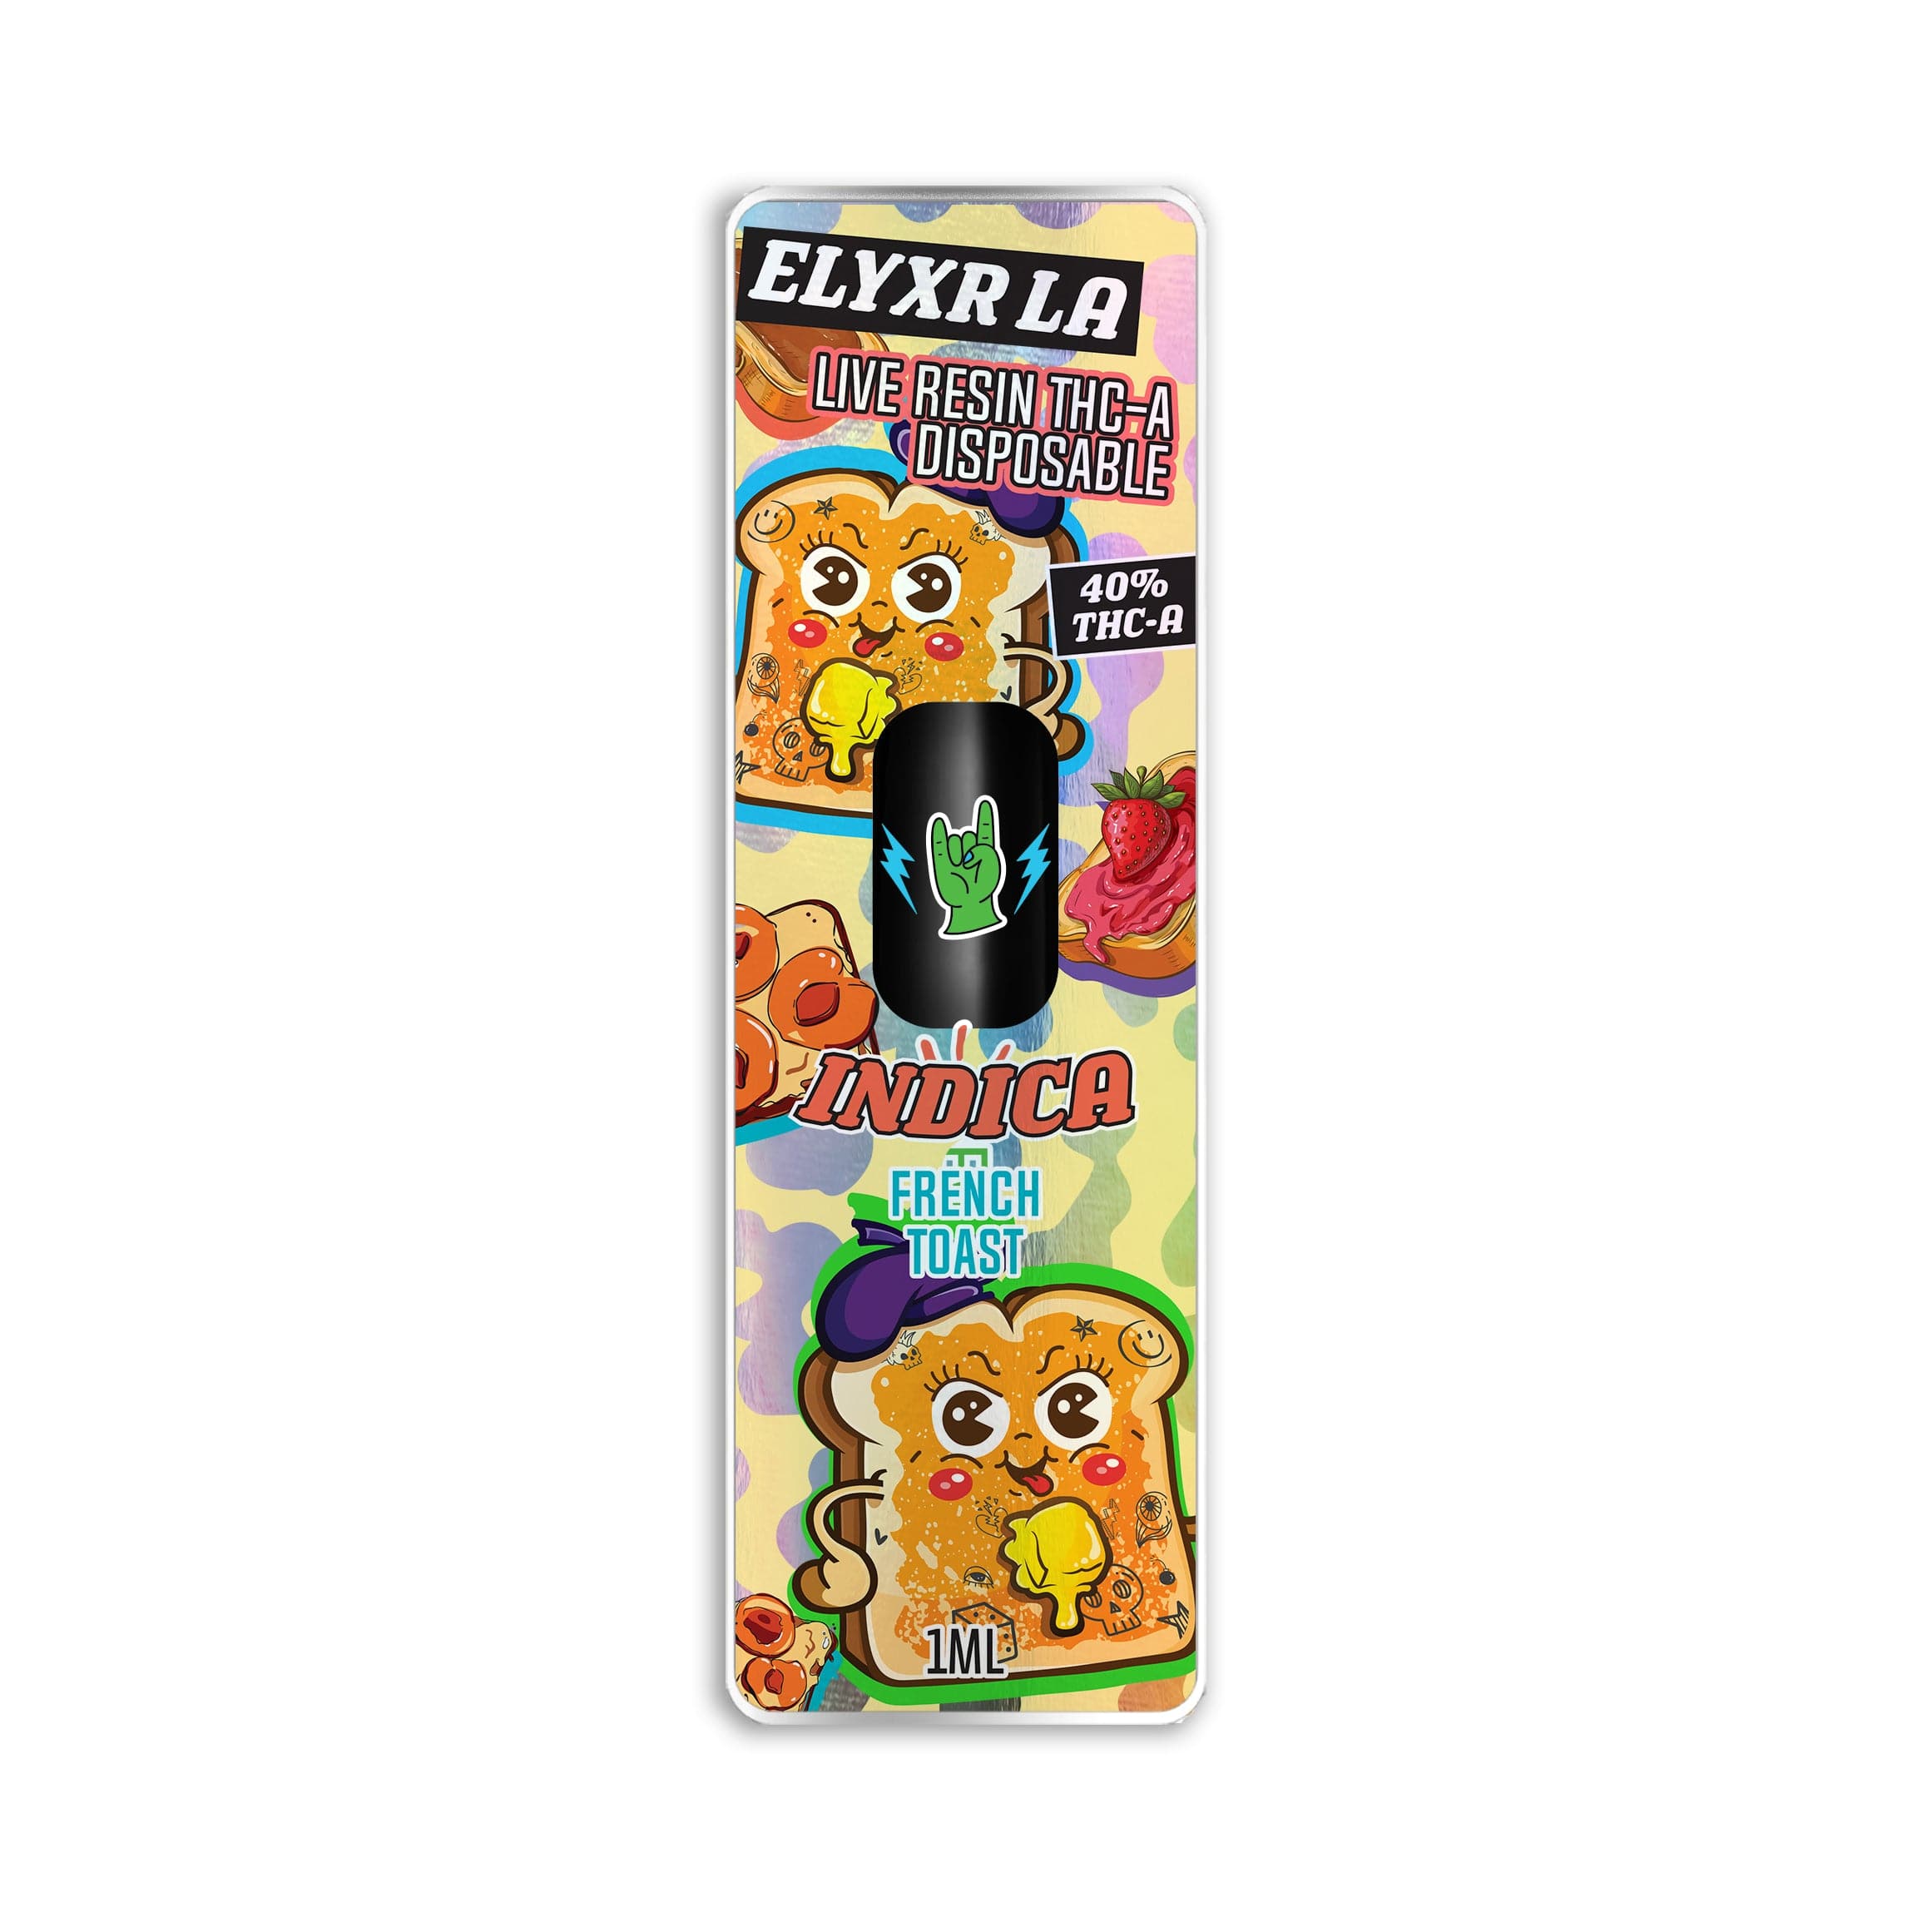 Live Resin THC-A Disposable 1 Gram (1000mg)